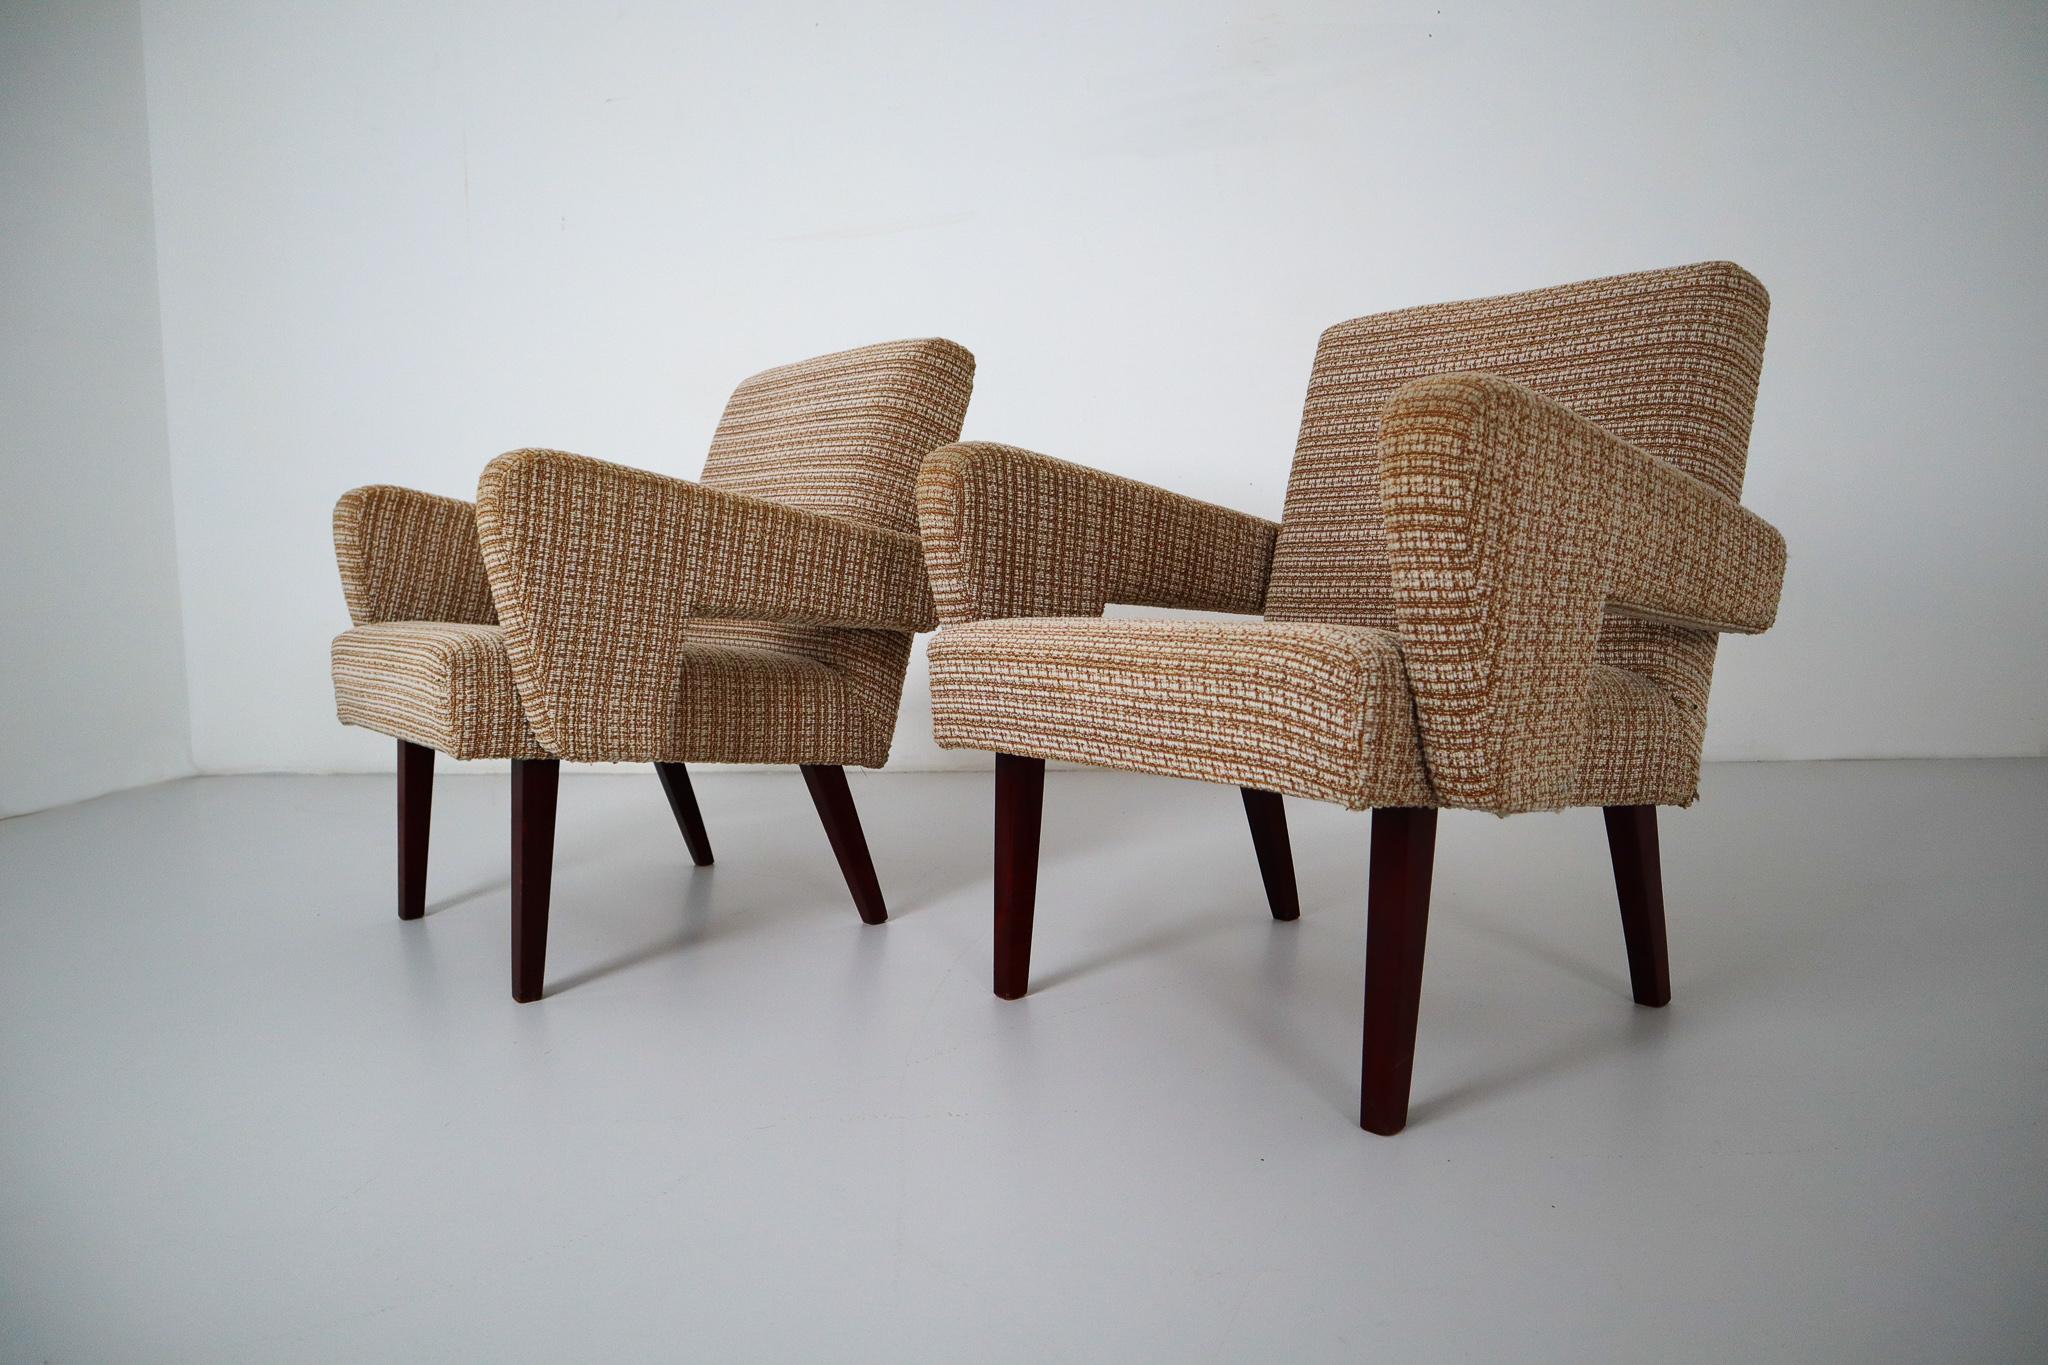 These midcentury lounge chairs are made in Czech Republic, circa 1960. The chairs are in good vintage condition and contains original fabric and beech feet. The fabric have some wear from previous use but remains in very good condition.